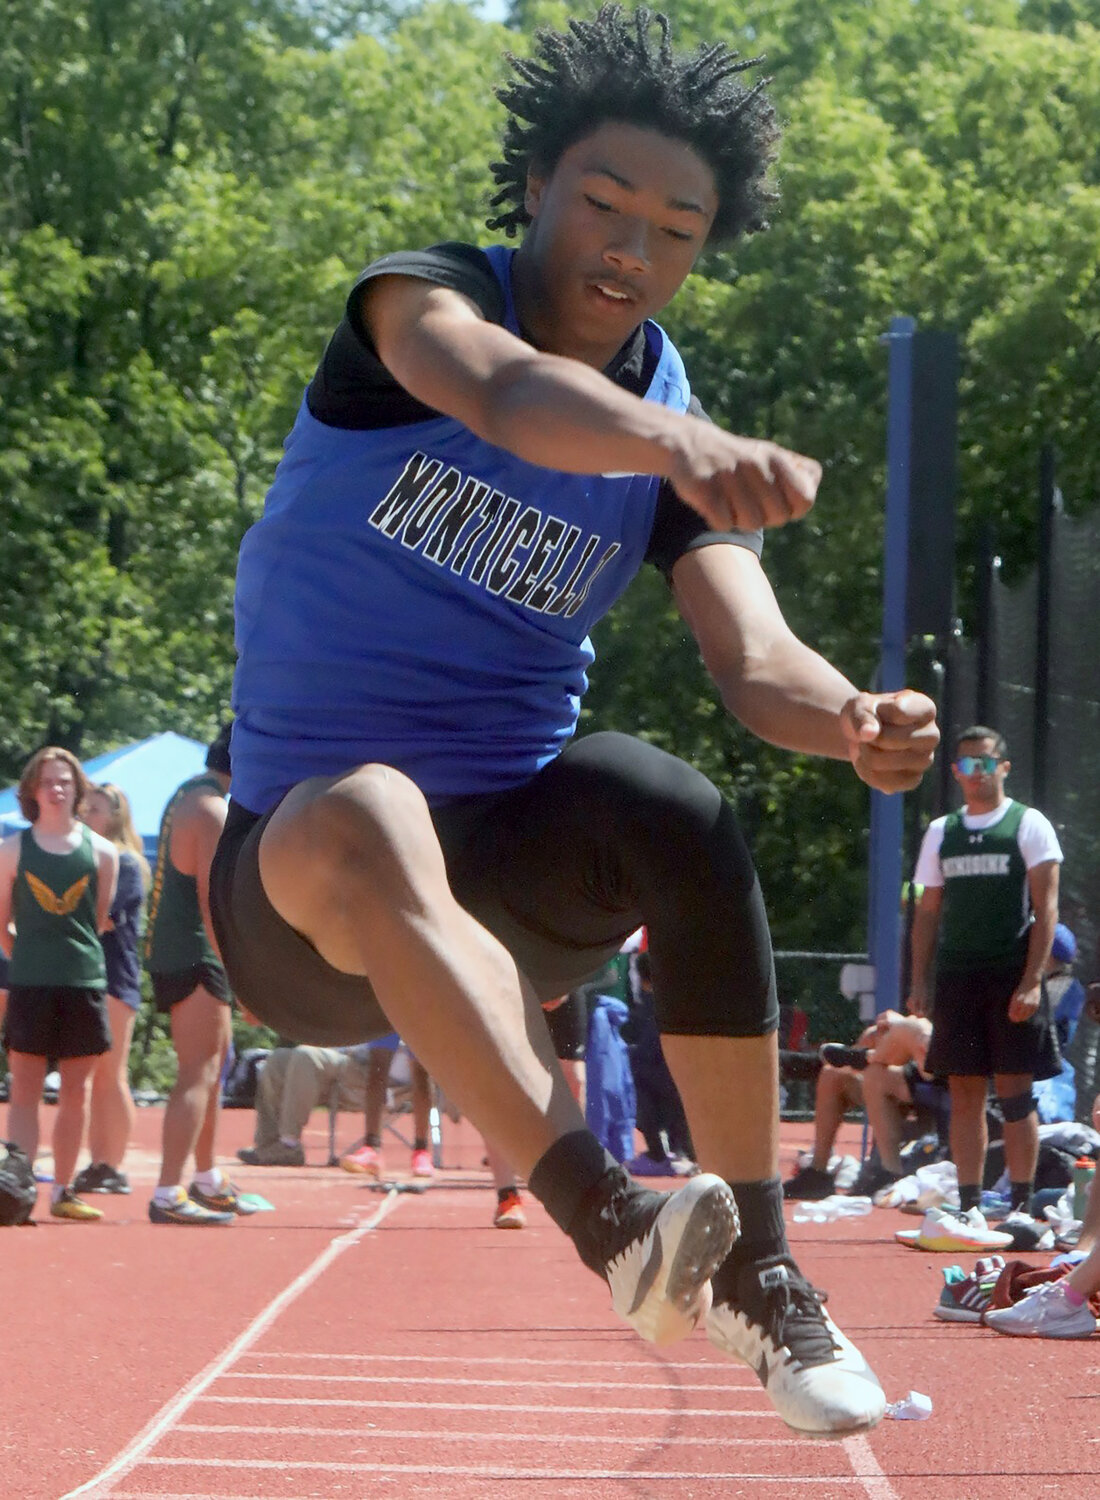 Monticello freshman Quenten Liciaga wins the high jump in the pentathlon. He also won the 110 hurdles and the long jump but finished seventh overall. He was the defending Class B champion from a year ago.